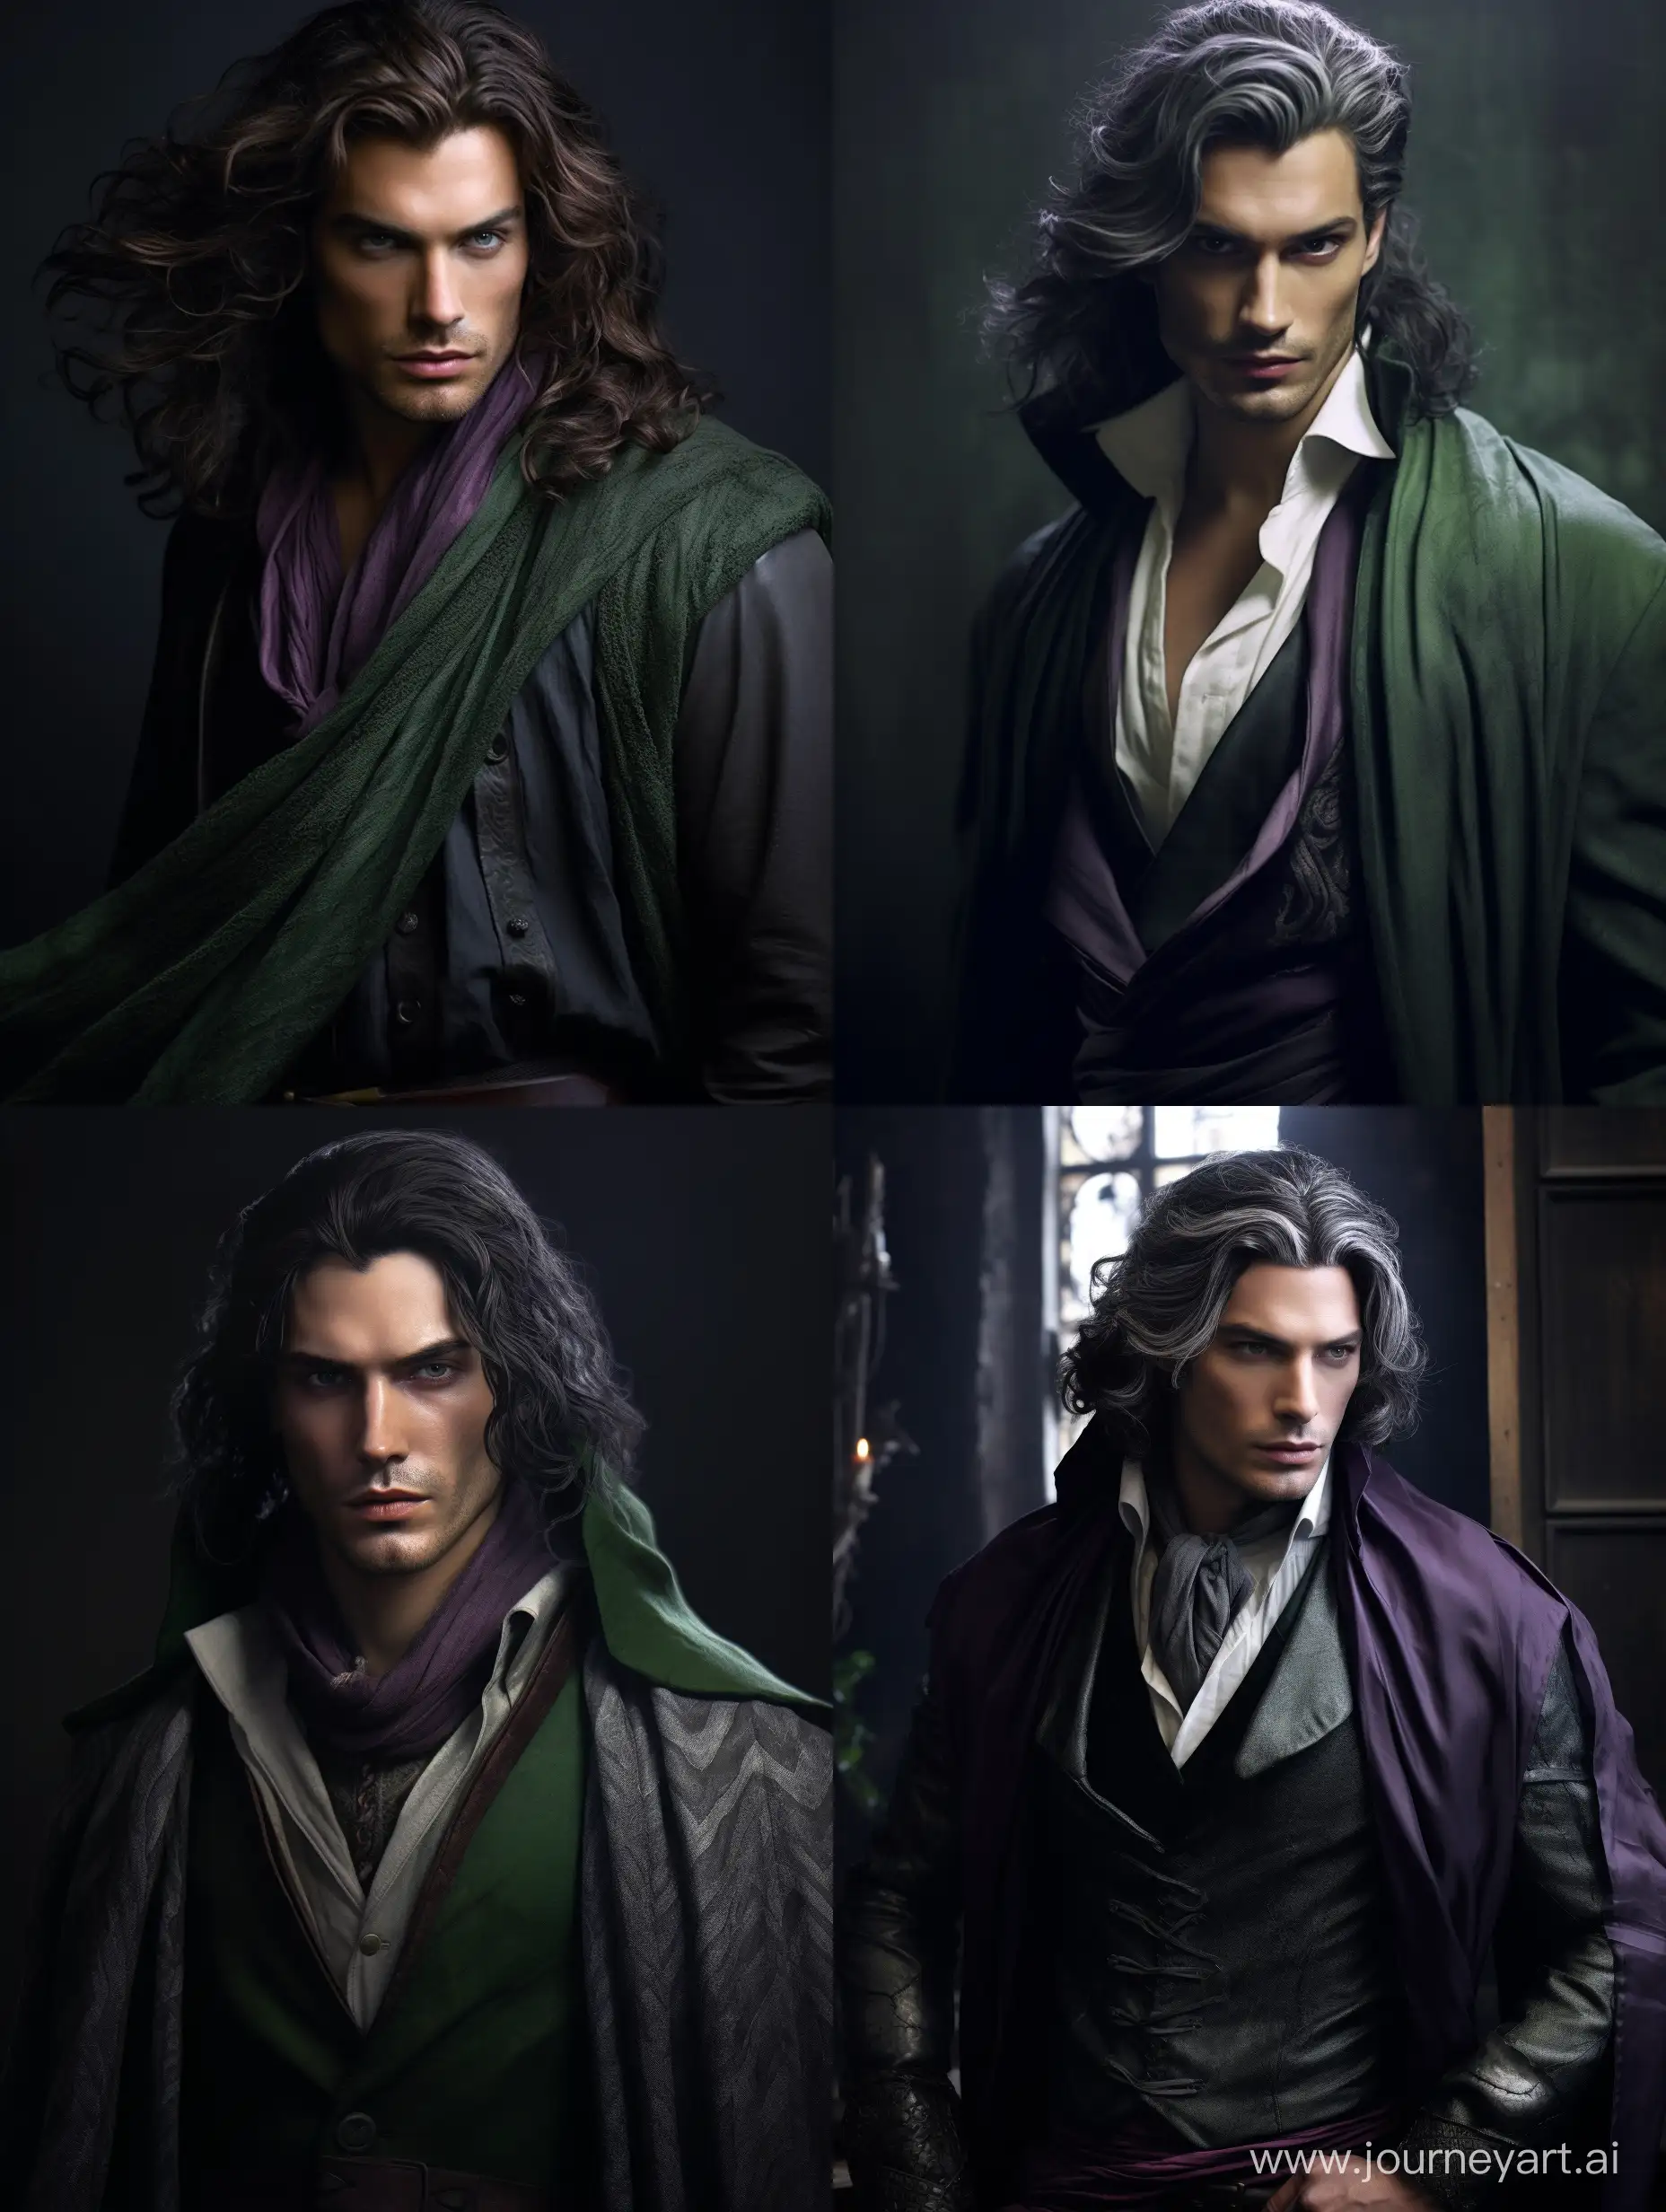 Enigmatic-Renaissance-Mage-in-Elegant-Attire-with-Intimidating-Eyes